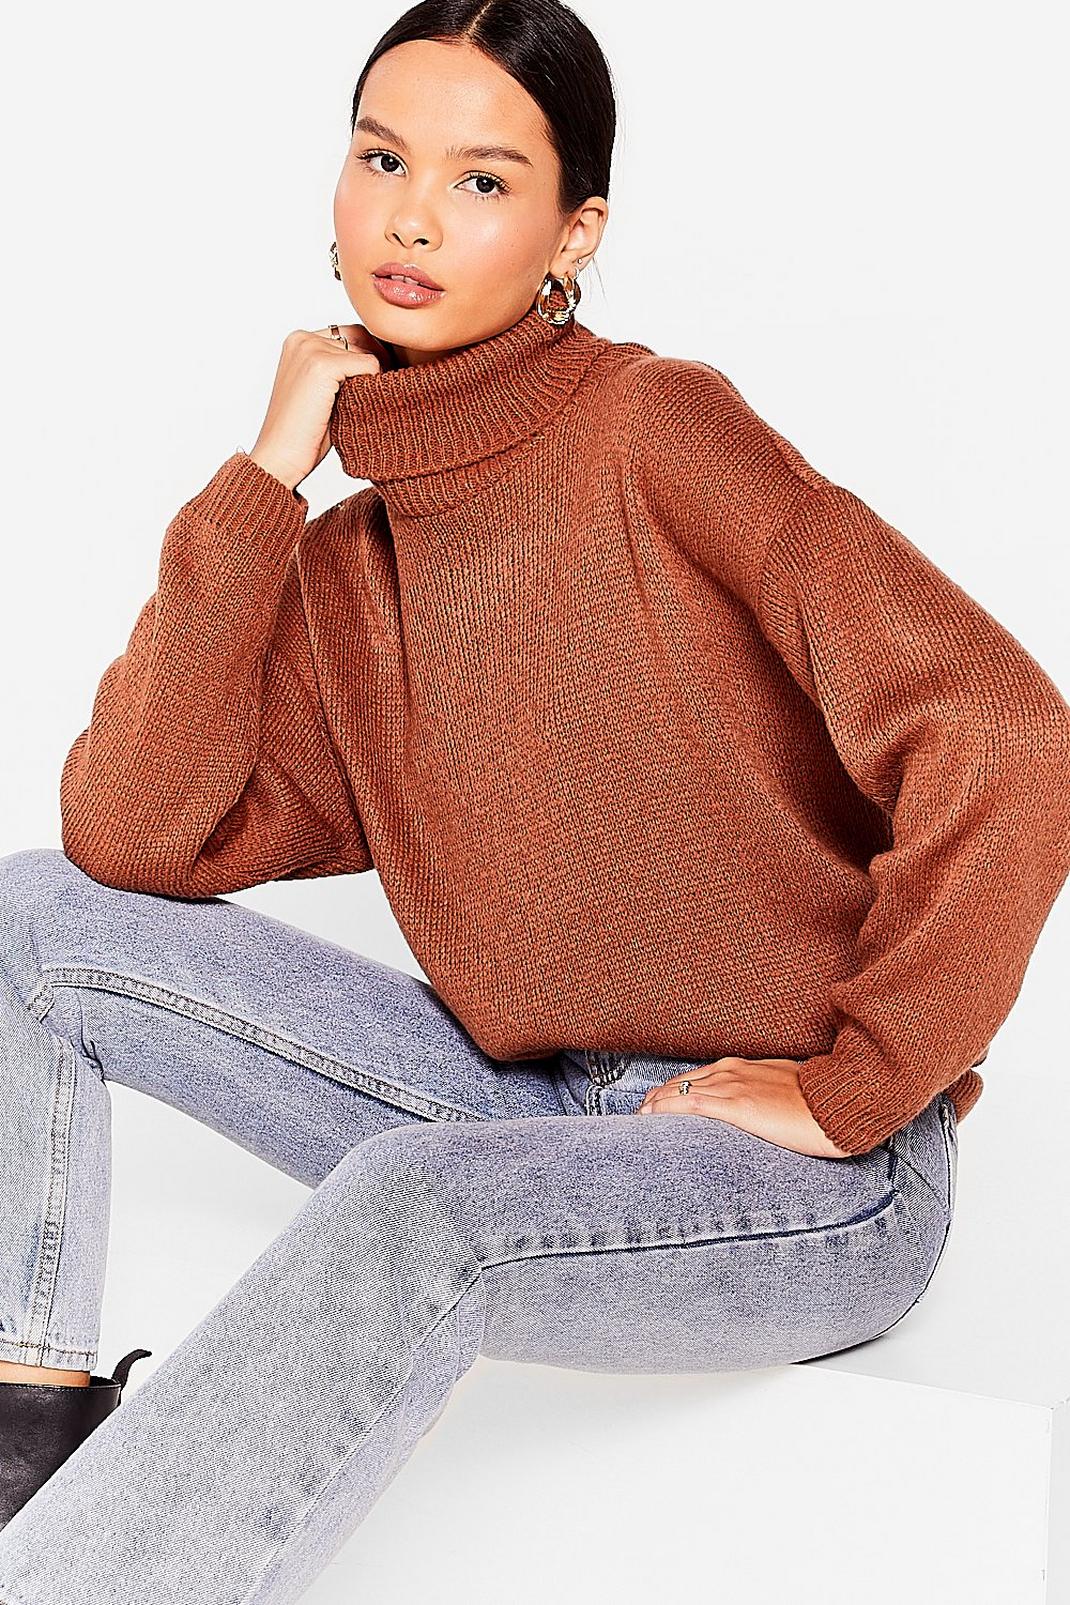 Rust Show 'Em How Knits Done Turtleneck Sweater image number 1